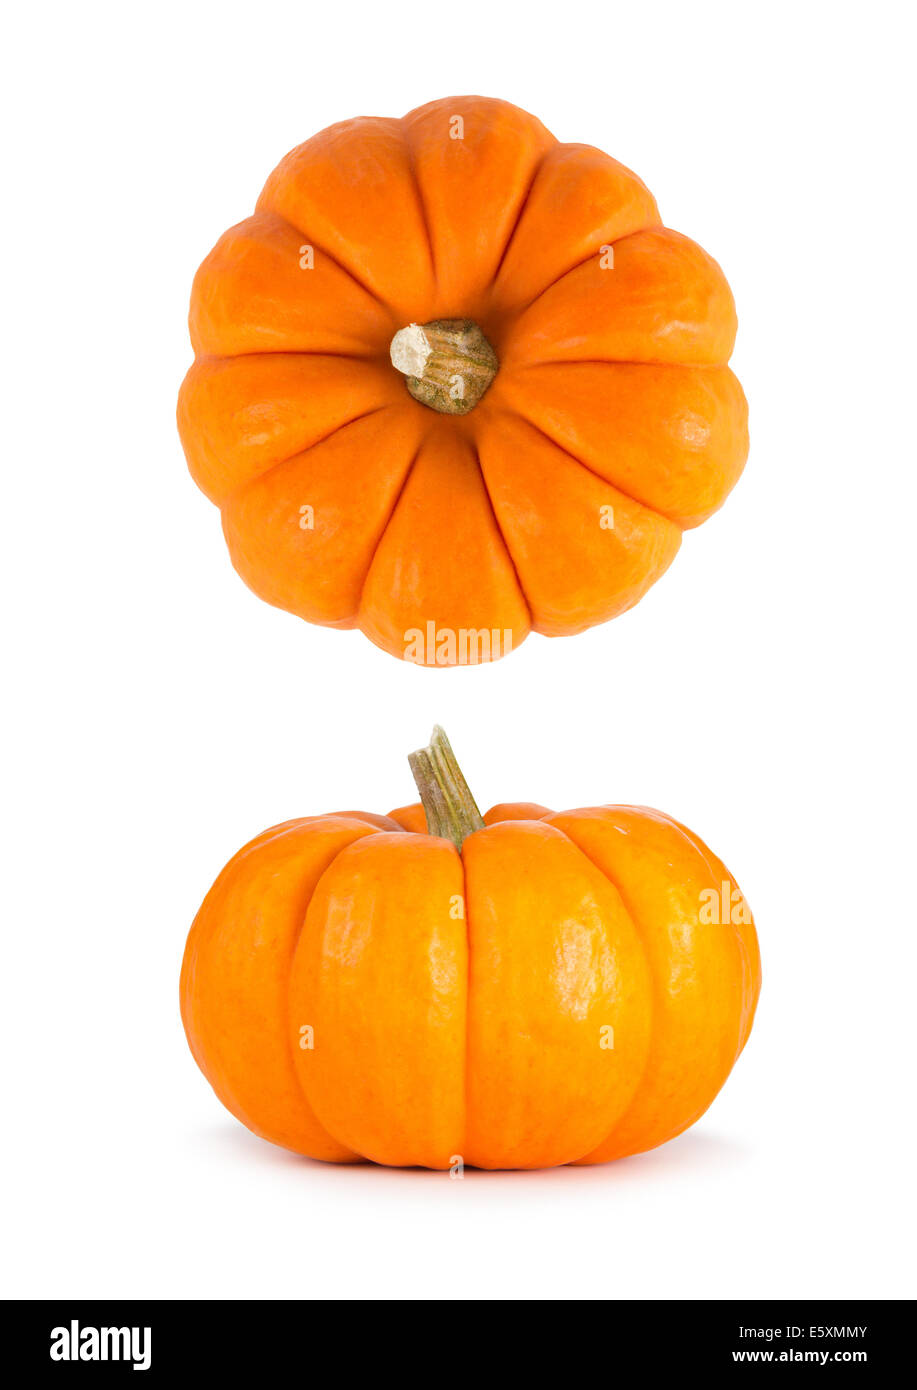 Mini orange pumpkins isolated on a white background. Top and side view. Stock Photo